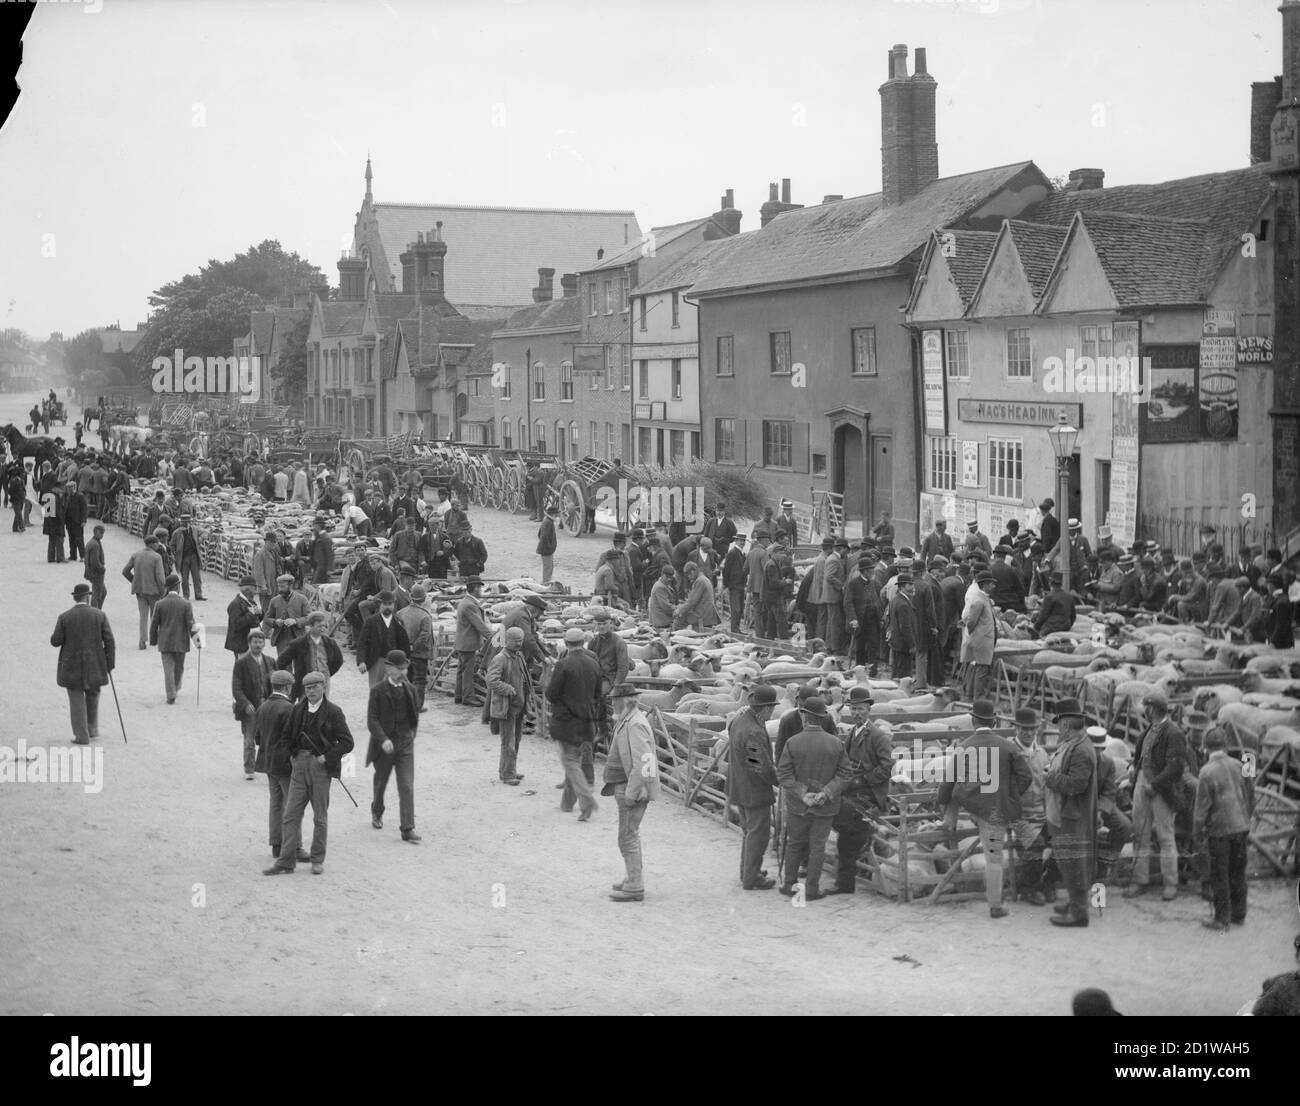 Cornmarket, Thame, Oxfordshire. A busy market day scene with penned sheep in Cornmarket and the Upper High Street. Men are looking over the sheep, bargaining and chatting. The Nags Head Inn is in the foreground. Stock Photo